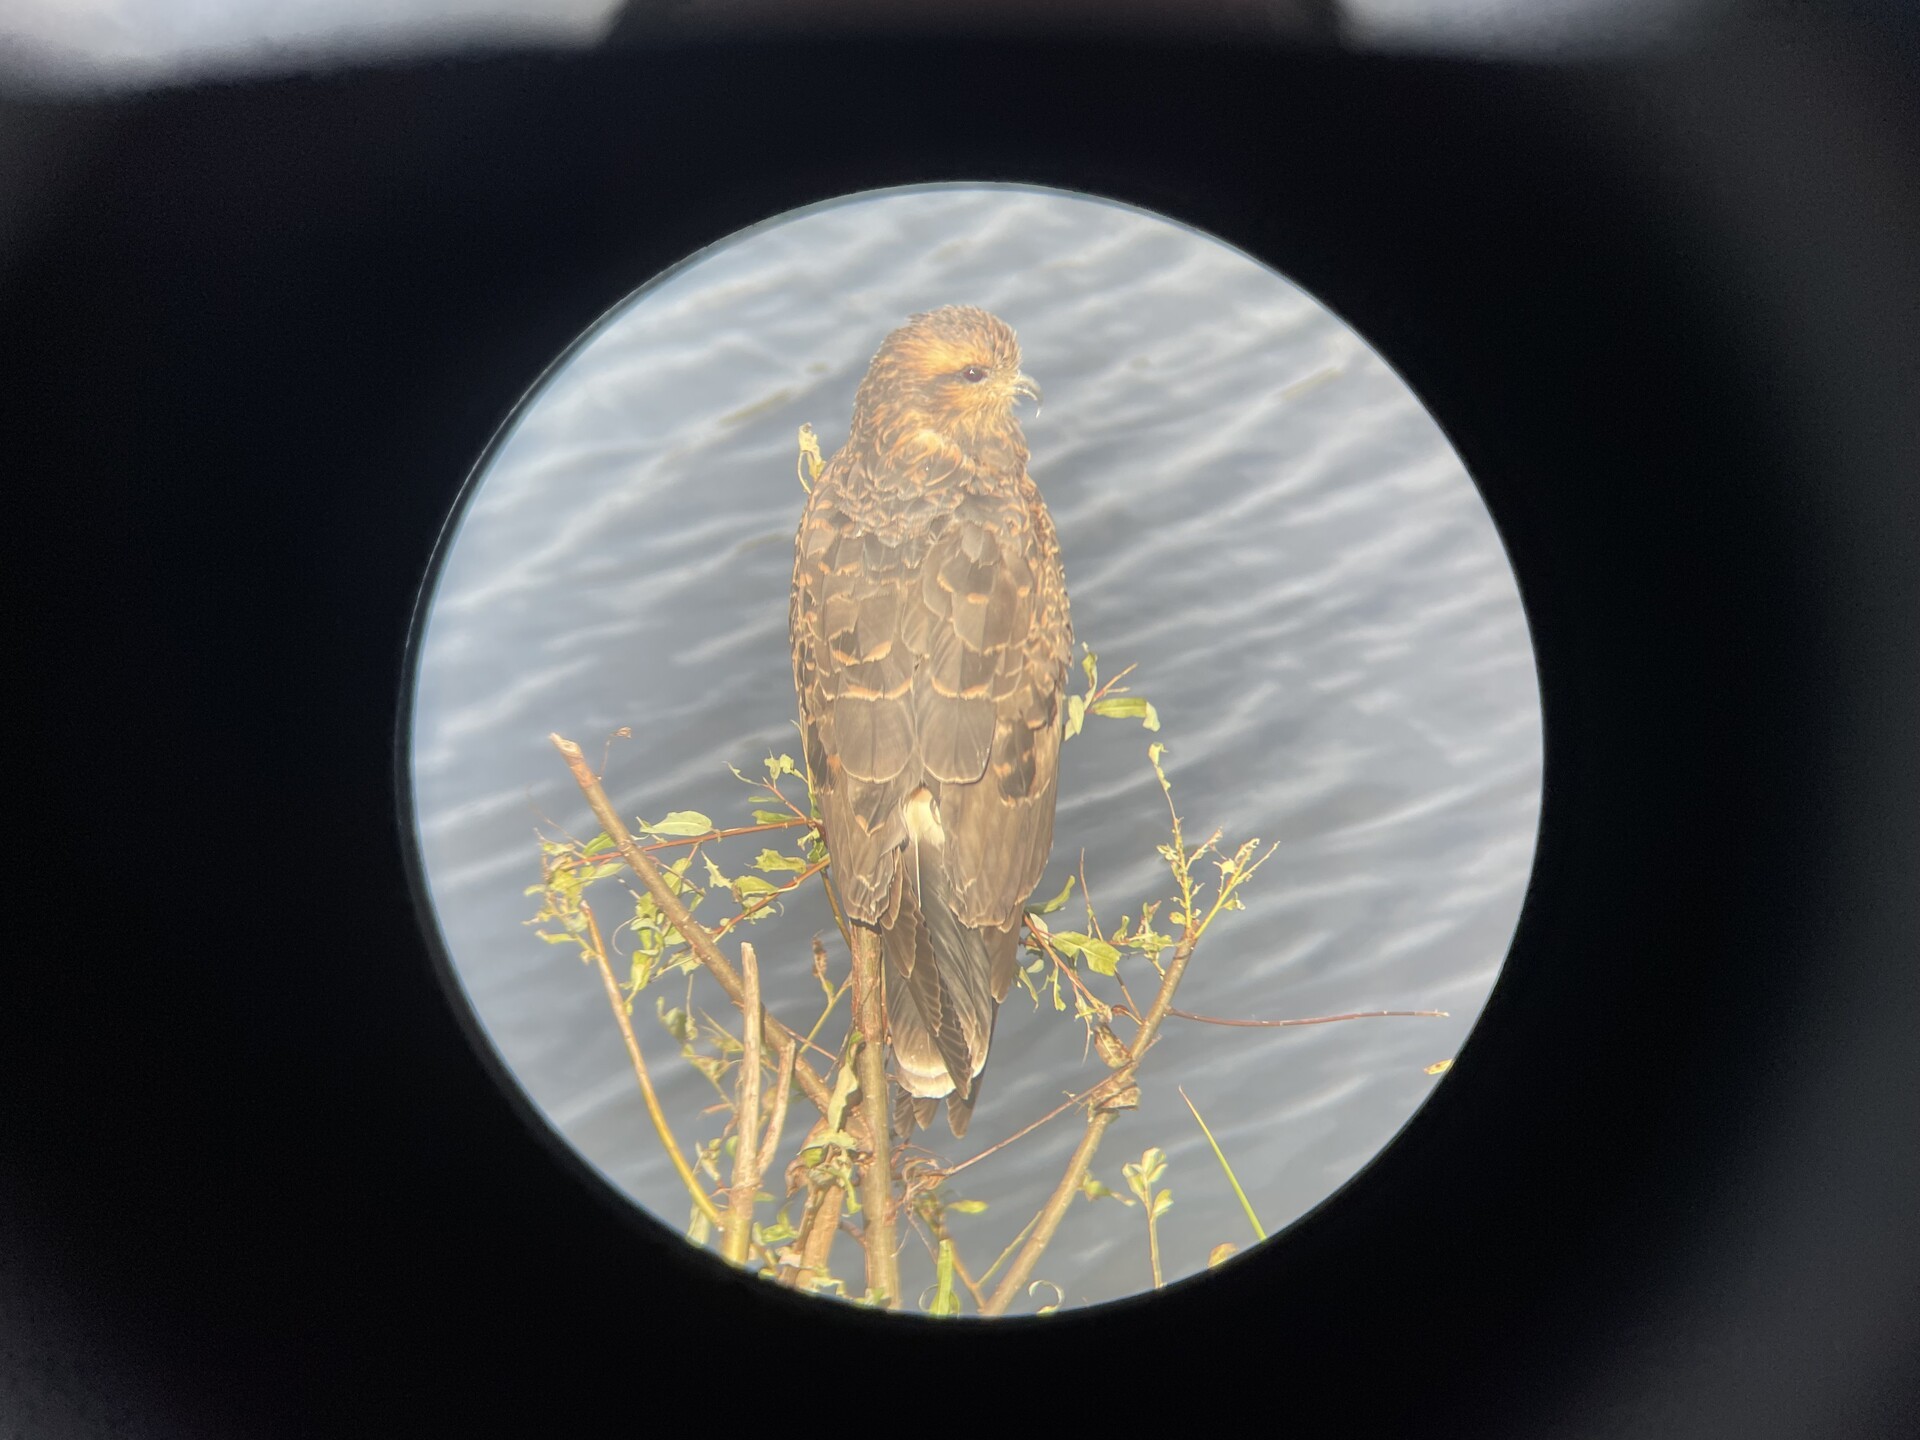 A bird of prey as seen through one of the lenses of a pair of binoculars